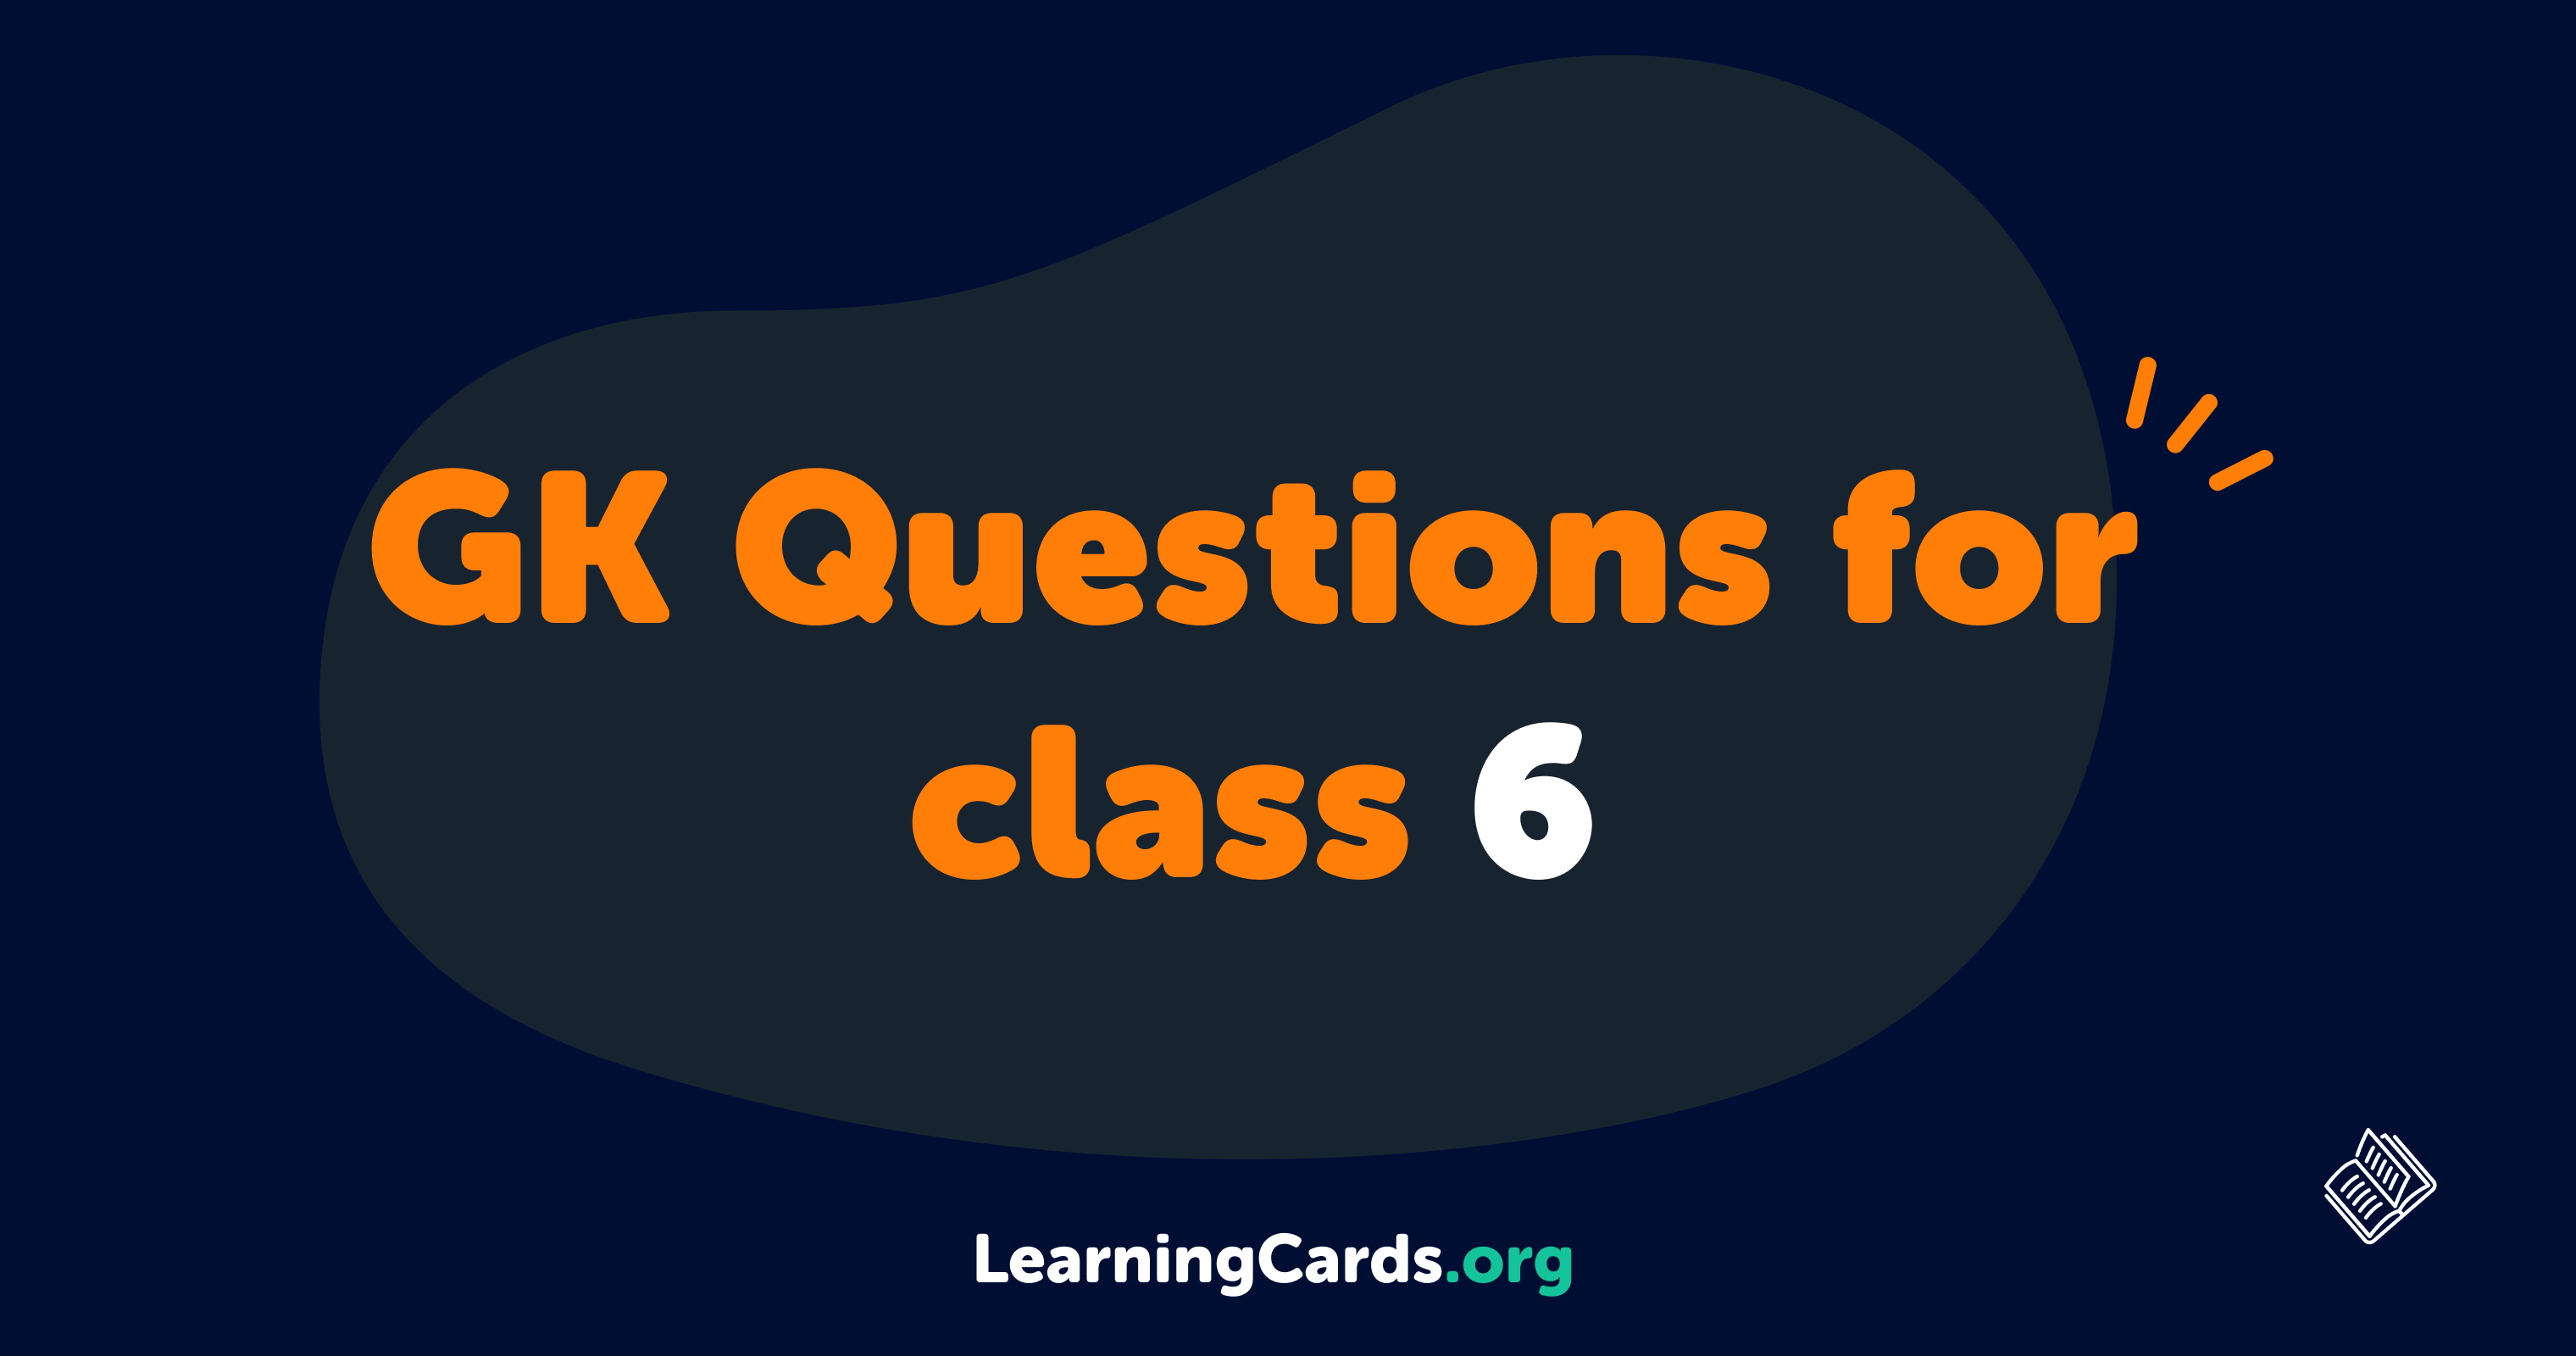 GK Questions for class 6